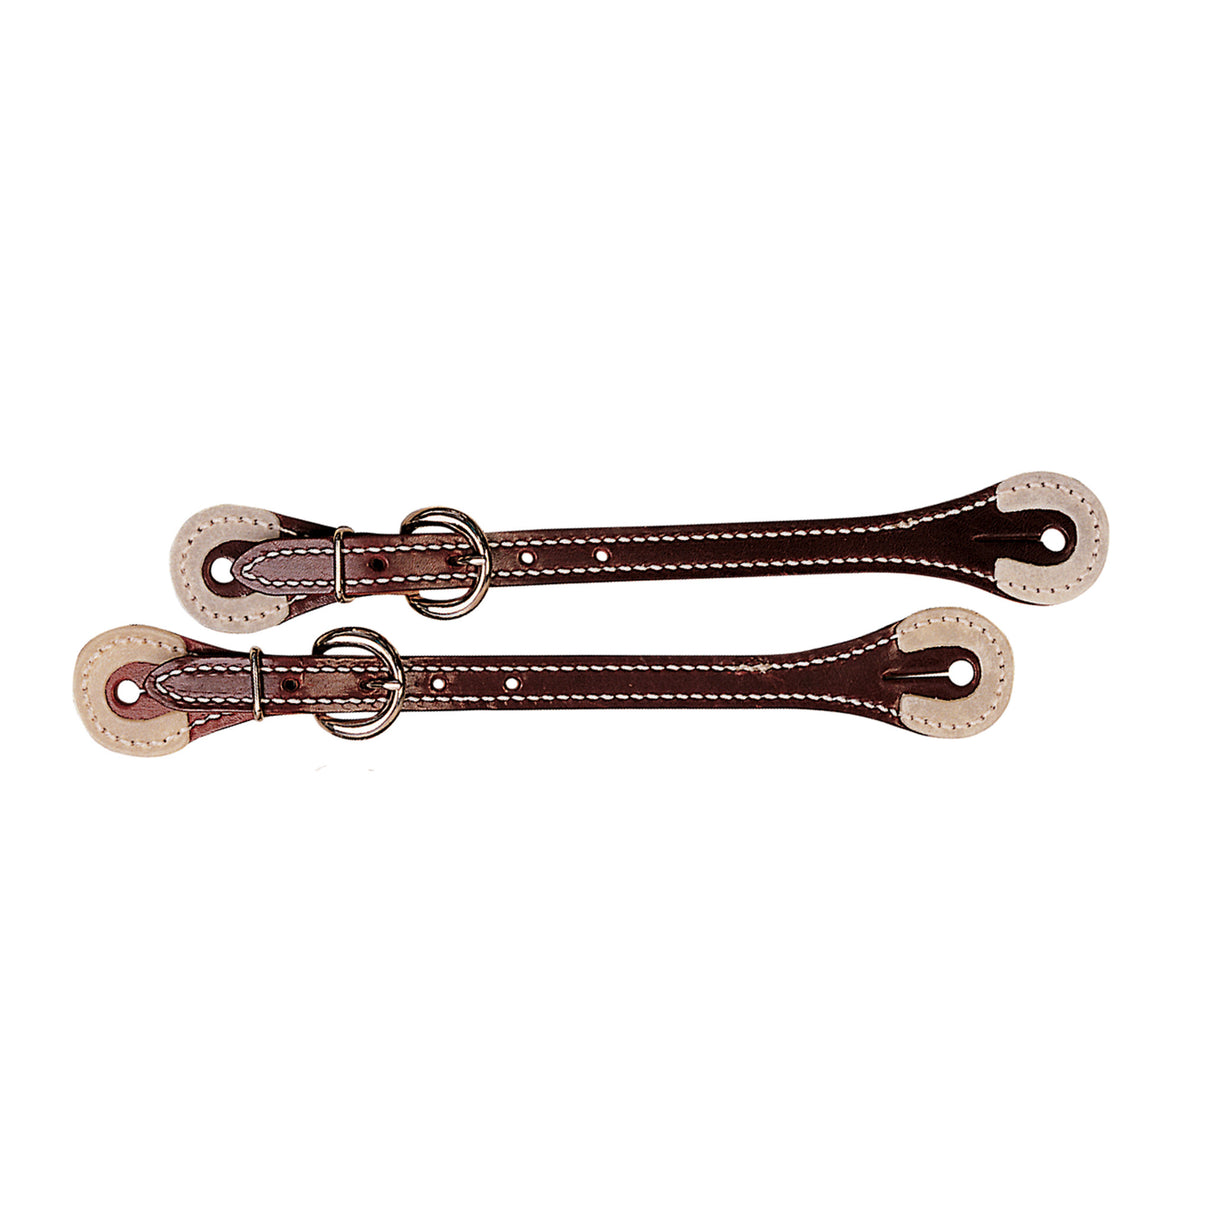 Spur Straps with Rawhide Corners